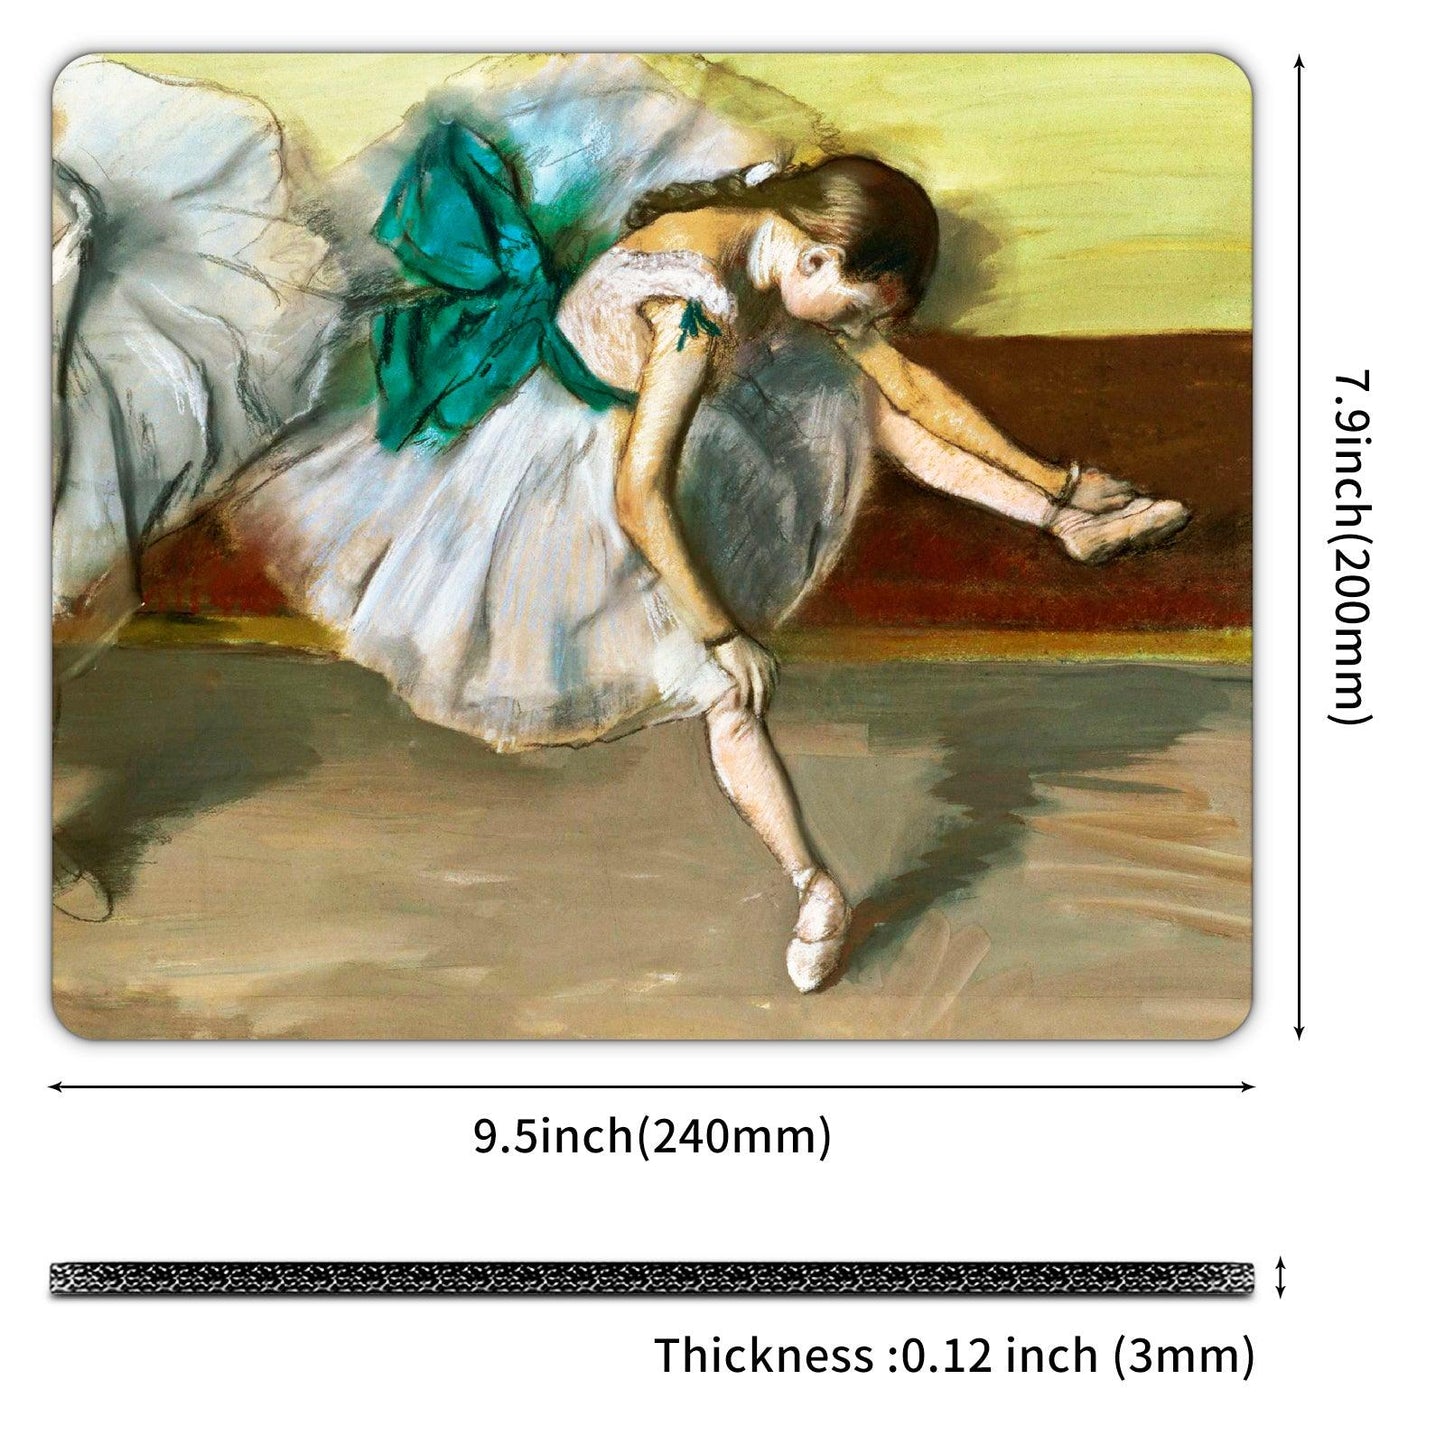 Art Square Mouse Pad 9.5 x 7.9 Inches (Resting Dancer by Edgar Degas) - Berkin Arts